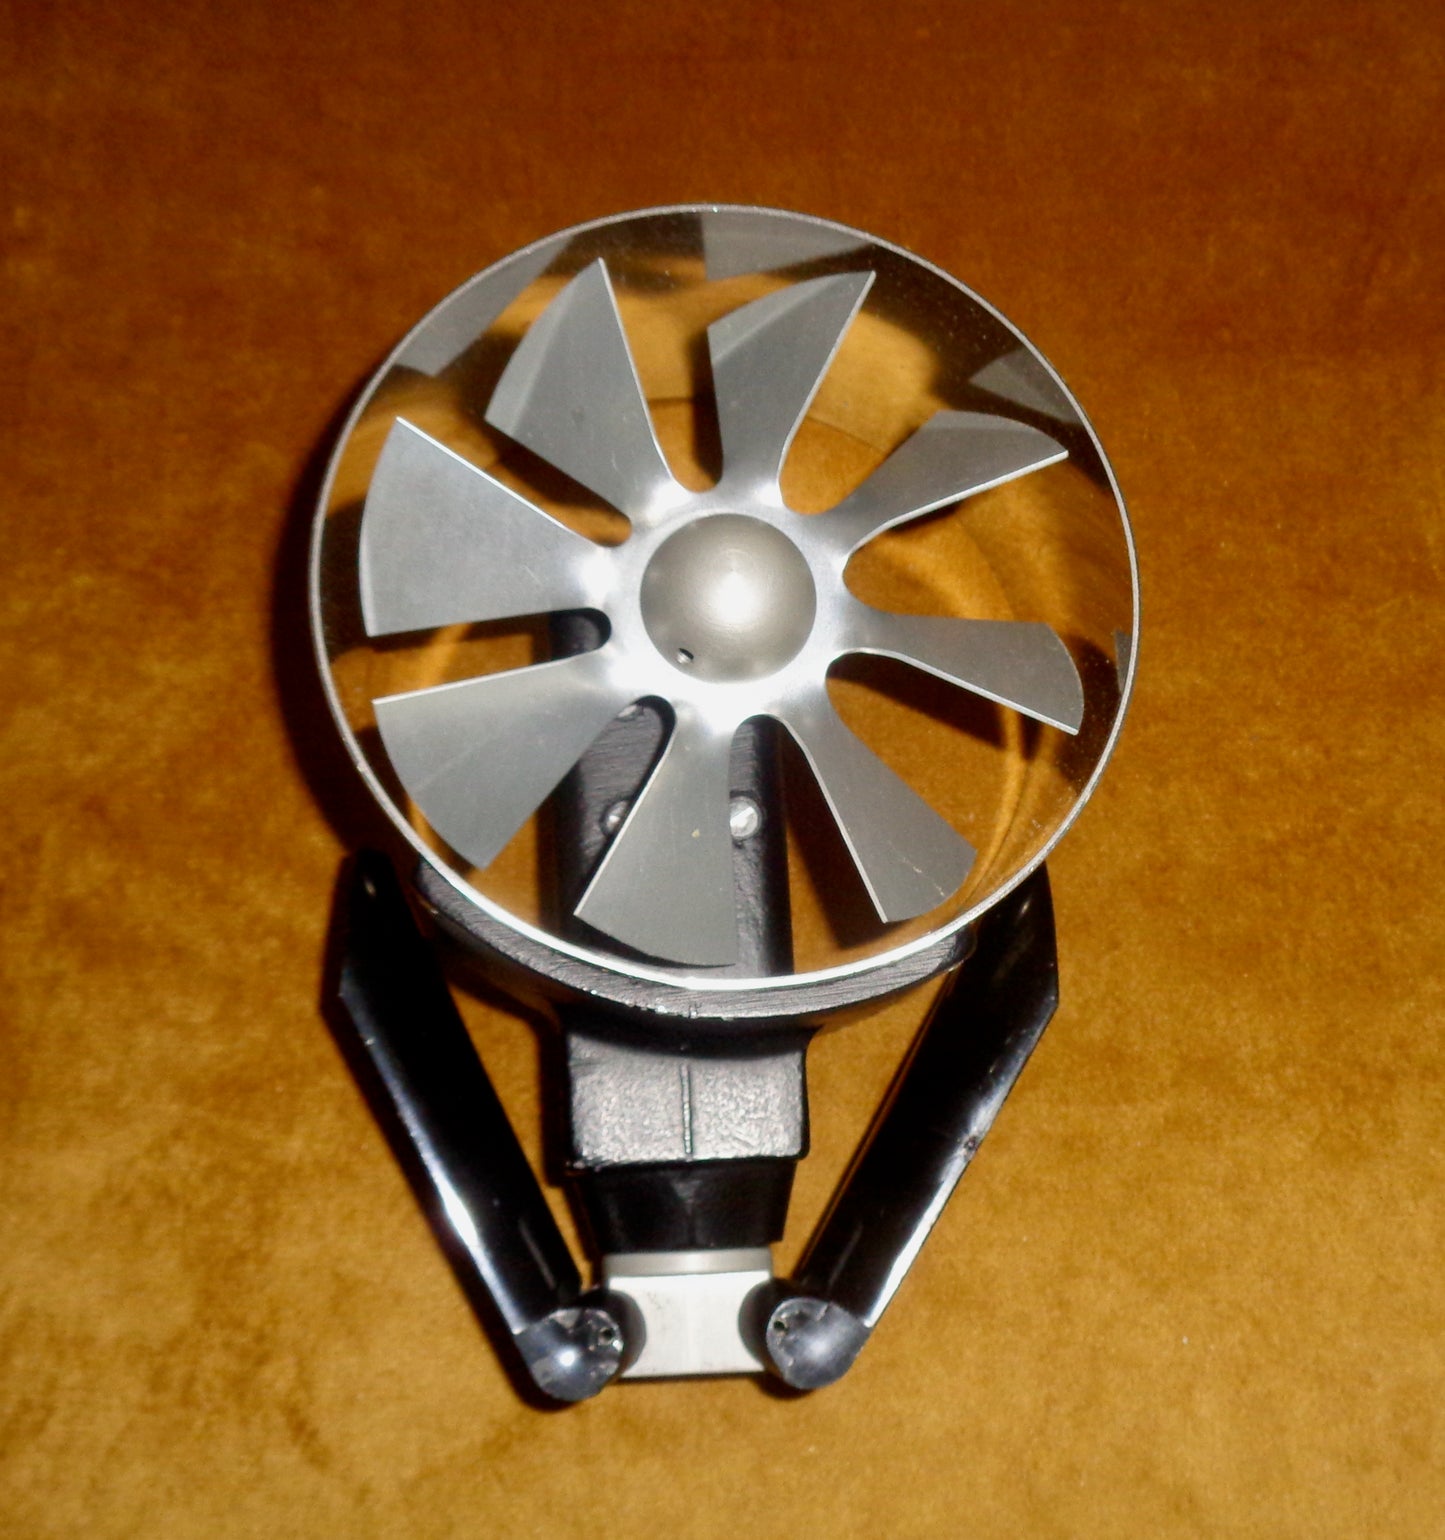 1970s AM5000 Air Flow Developments (AD) Anemometer in Its Original Yellow Leather Case